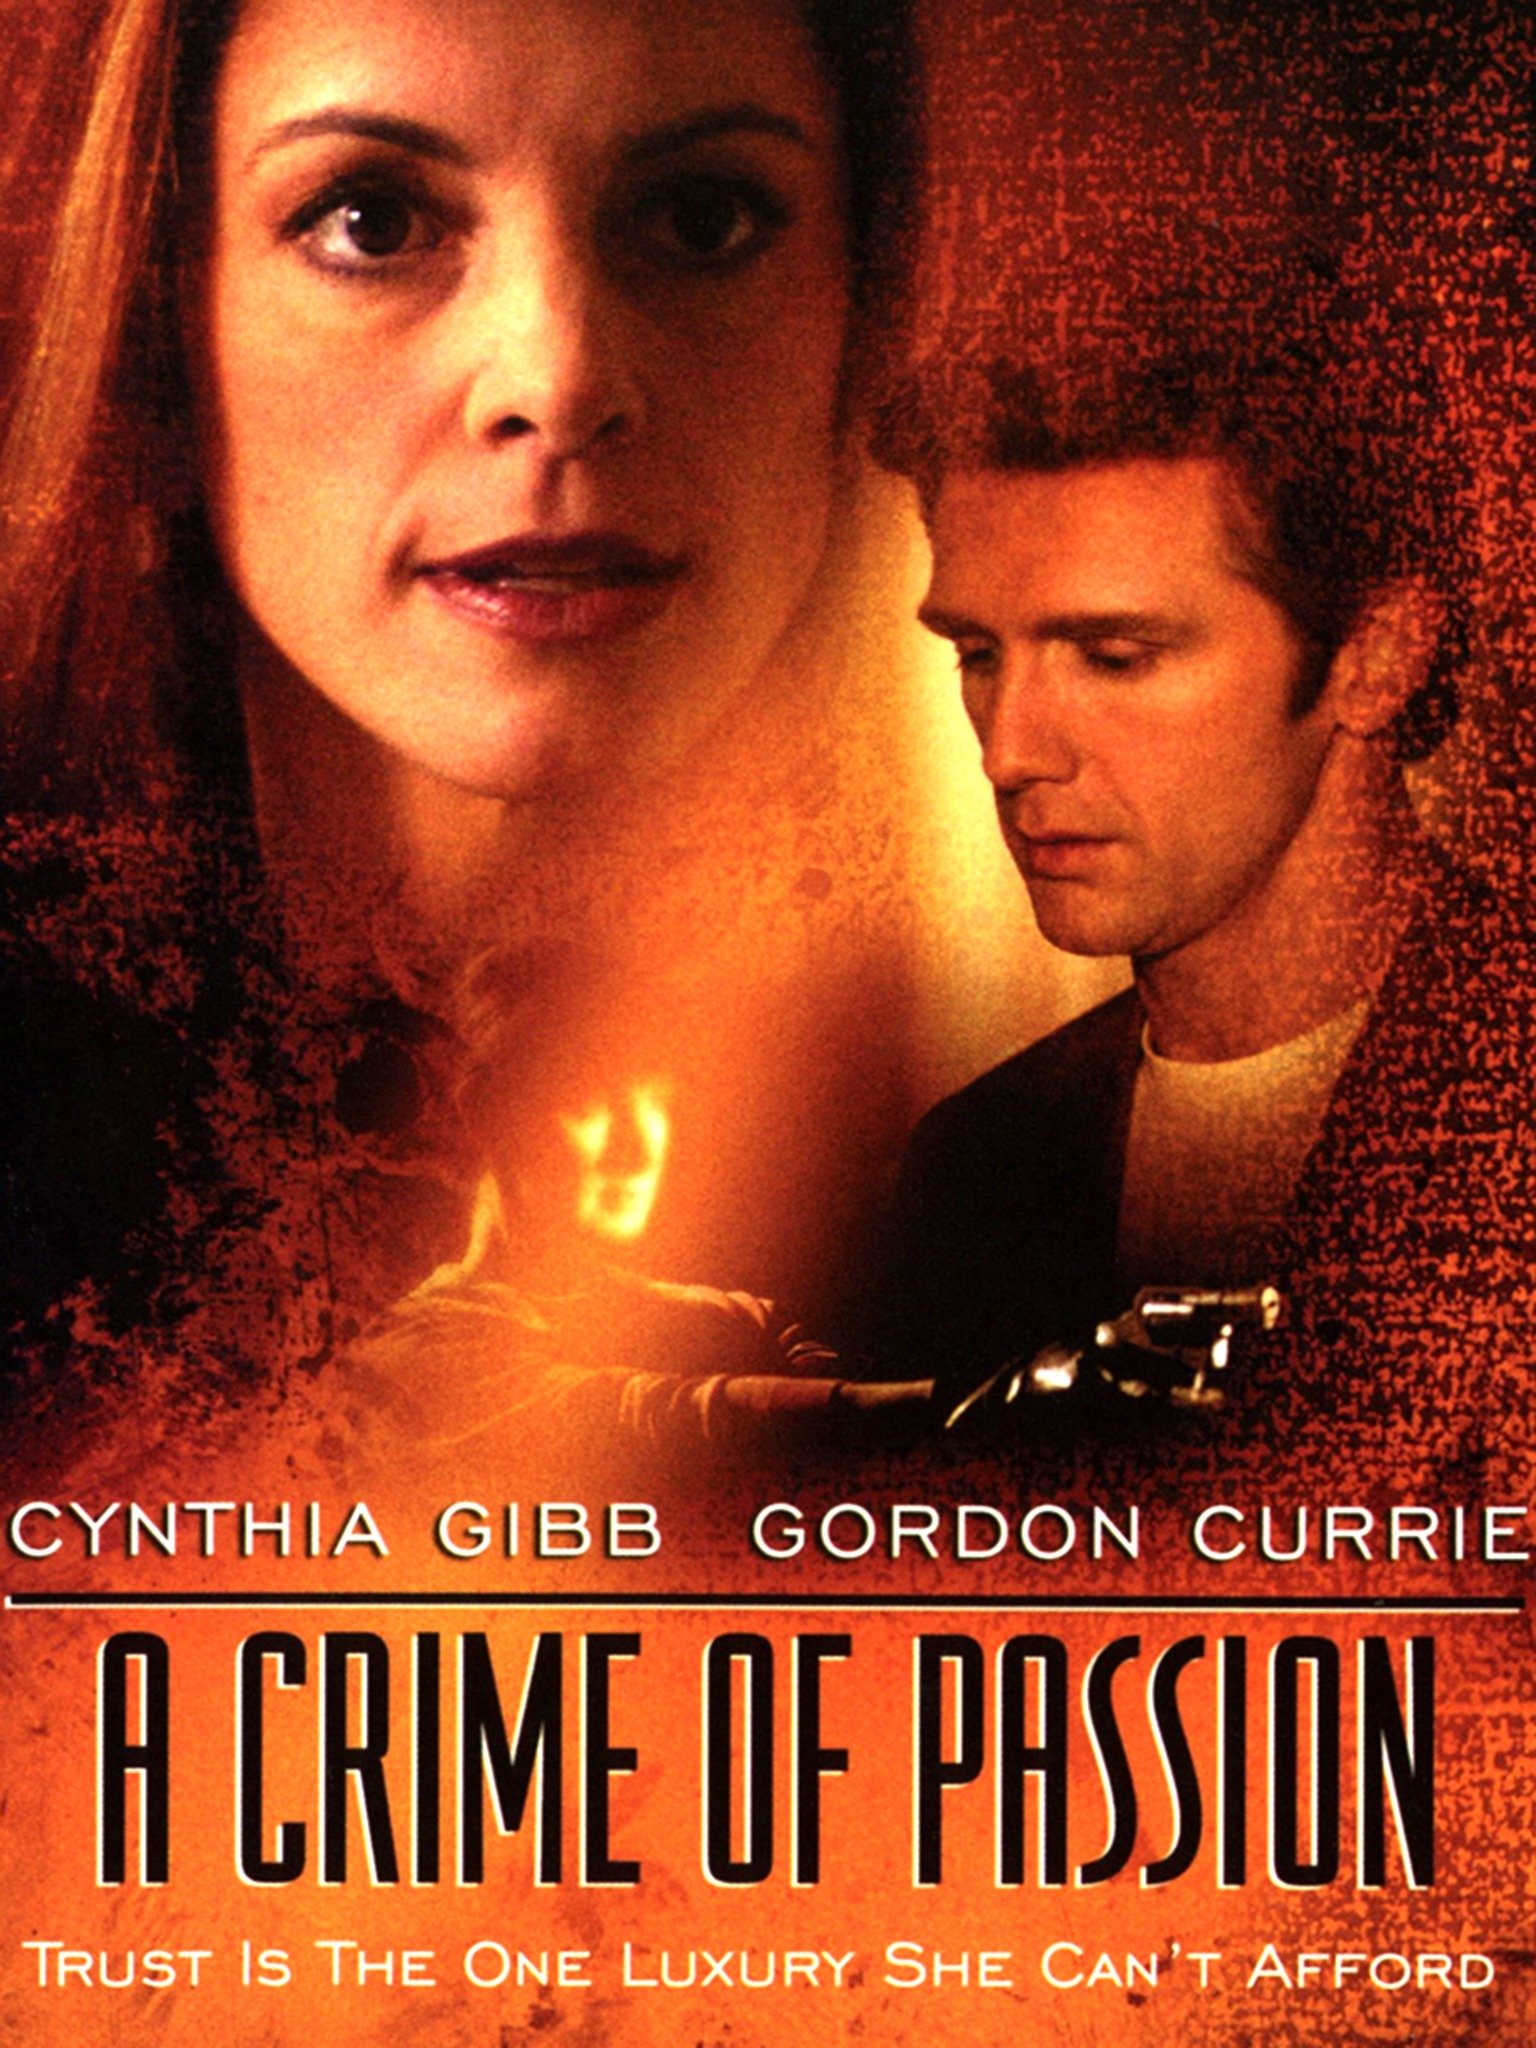 research on crime of passion